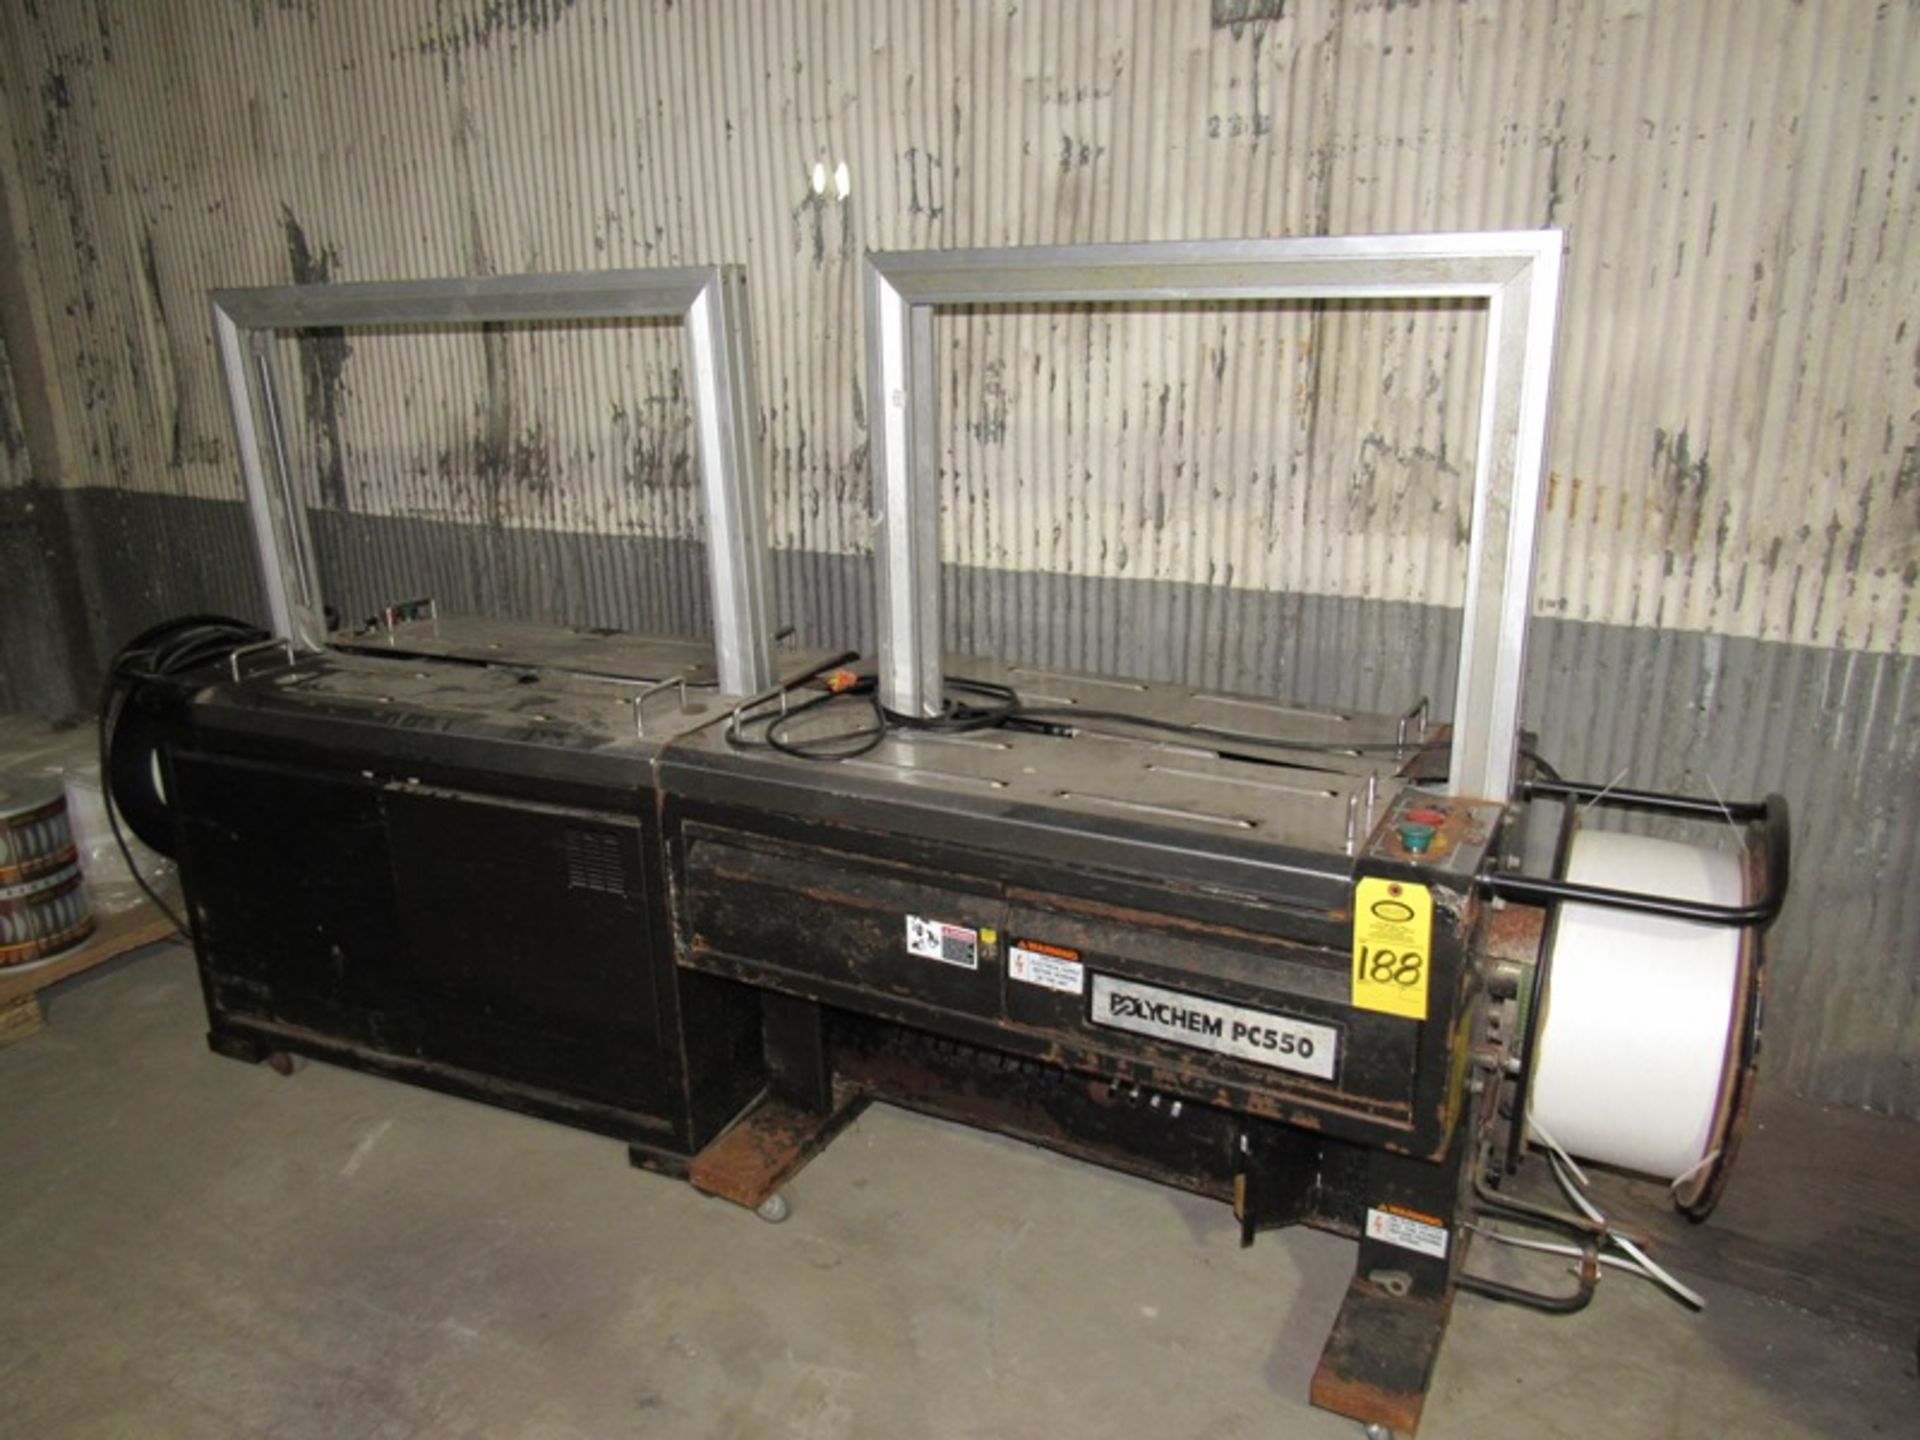 Lot of (2) Polychem Mdl. PC550 Strapping Machines (All Funds Must Be Received by Friday, August 9th.